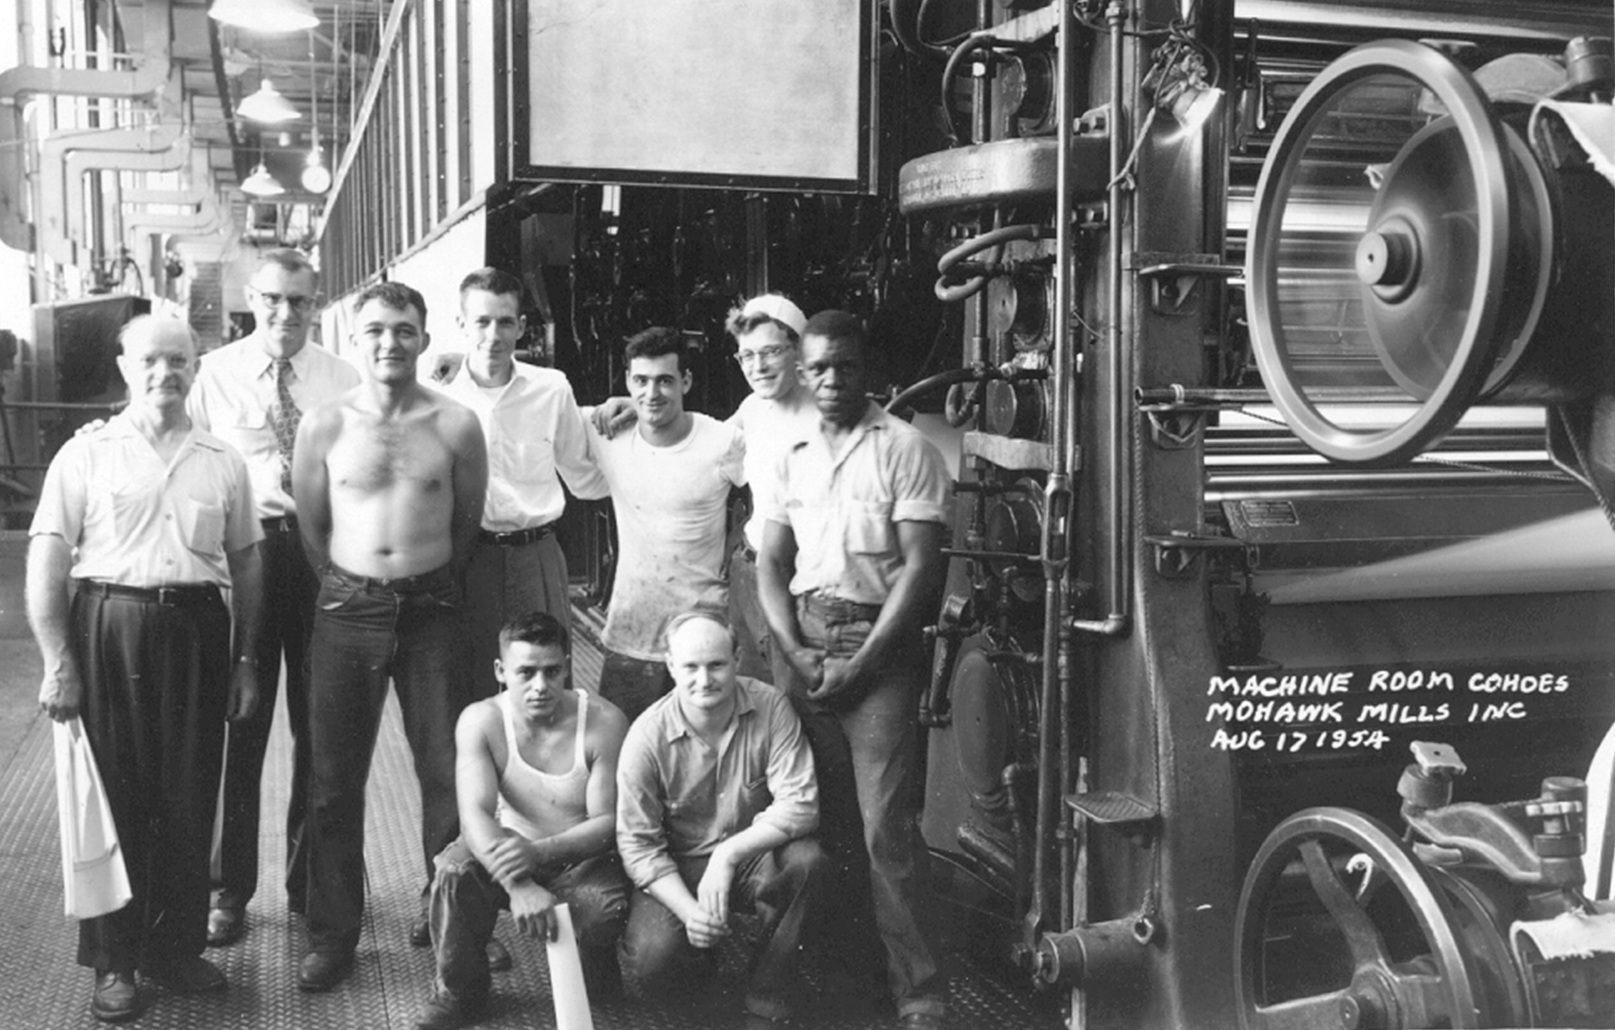 Vintage photo from inside the mill